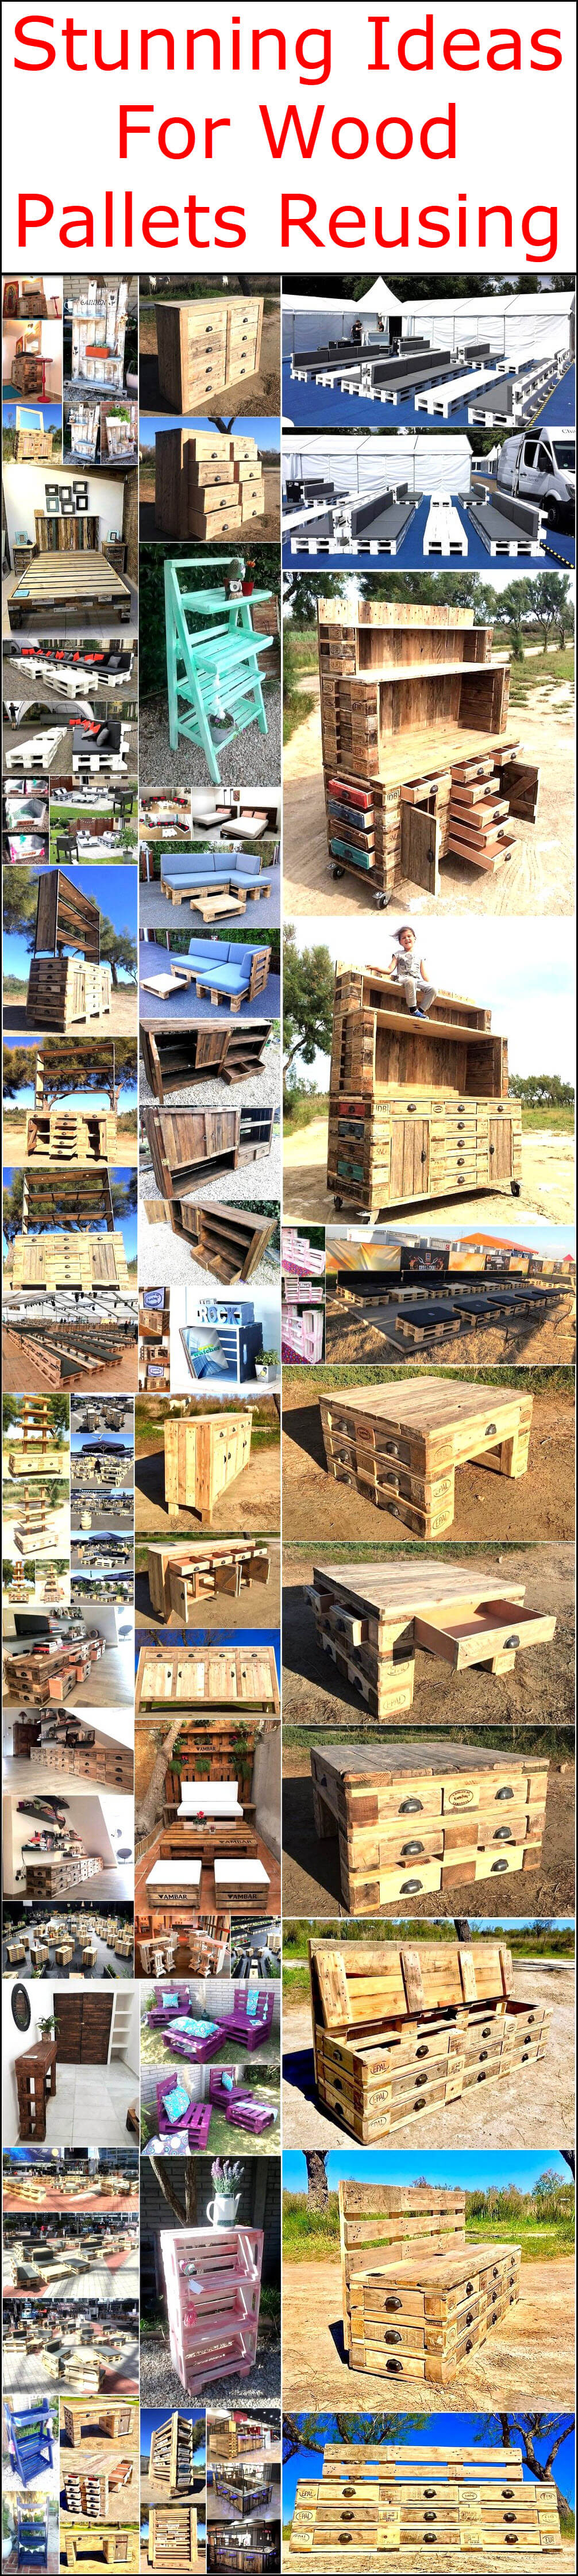 Stunning Ideas For Wood Pallets Reusing